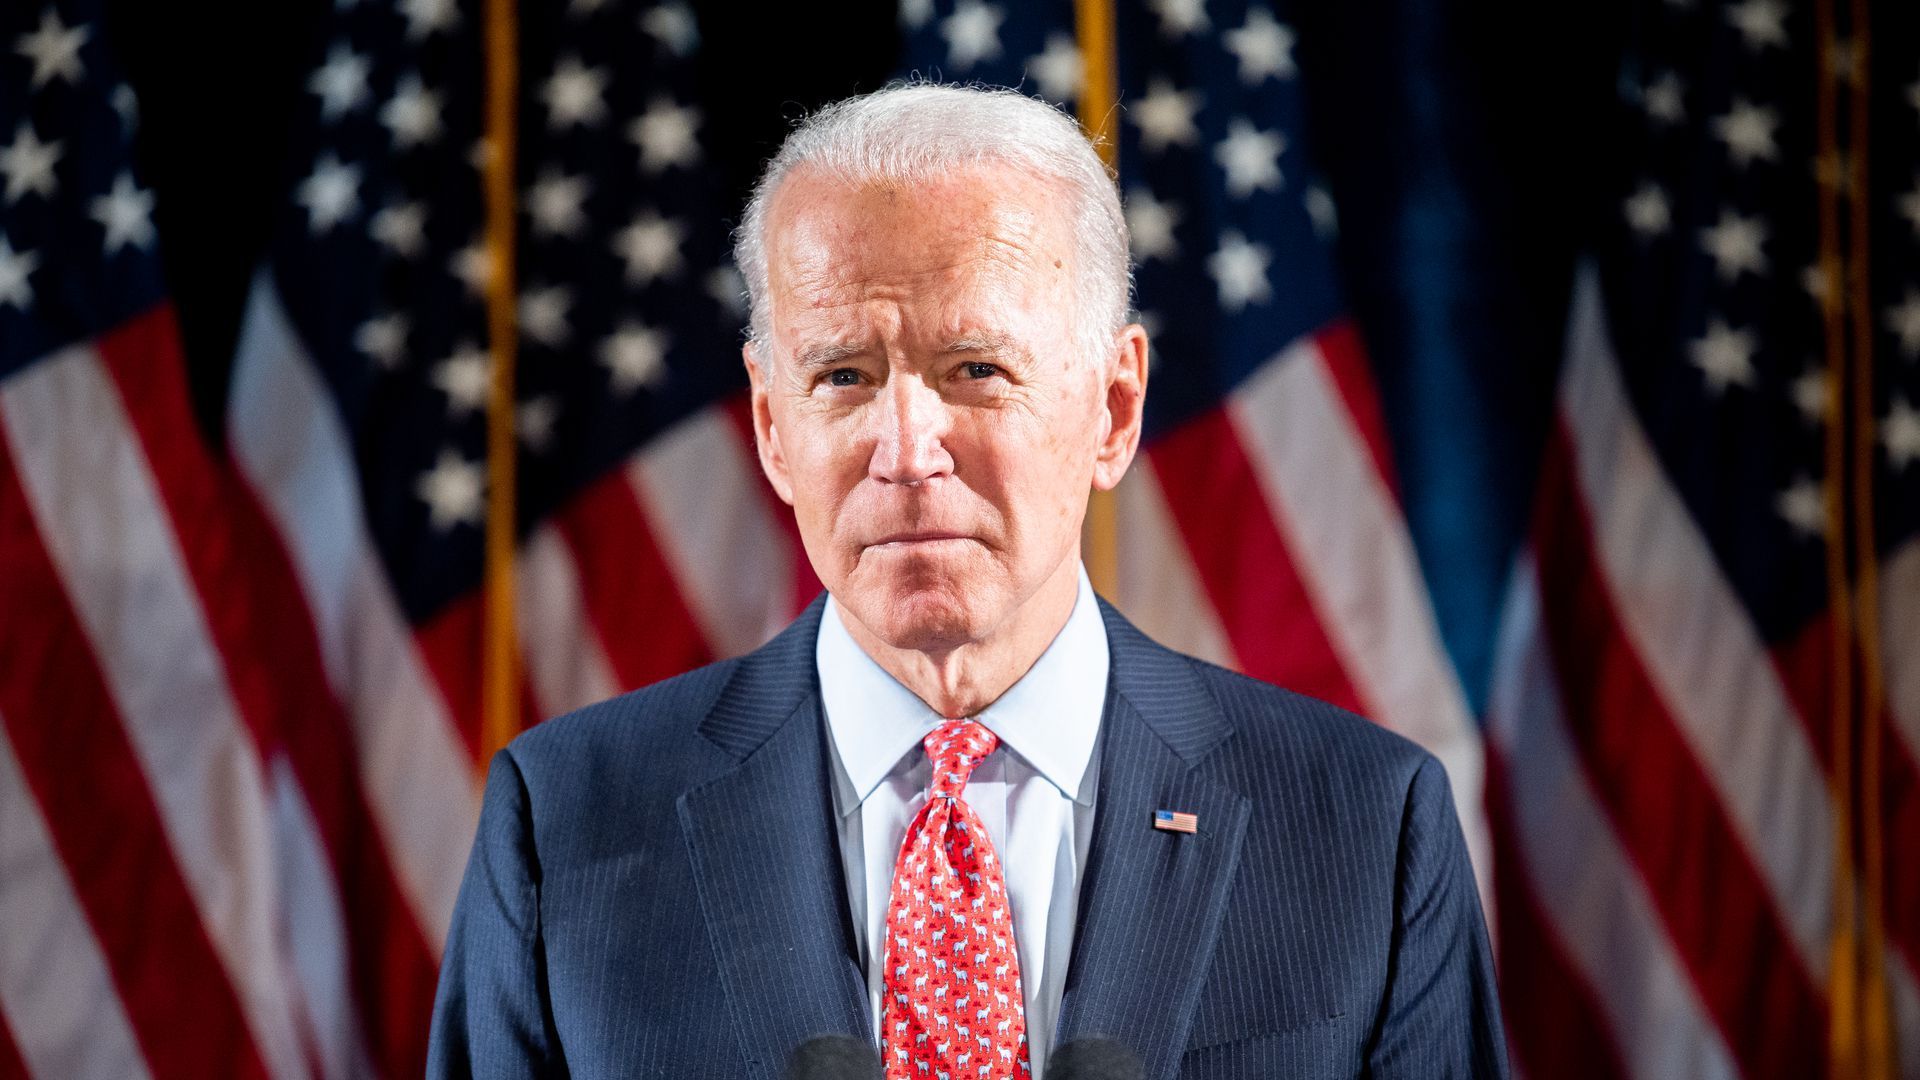 Biden campaign says he does not support defunding the police